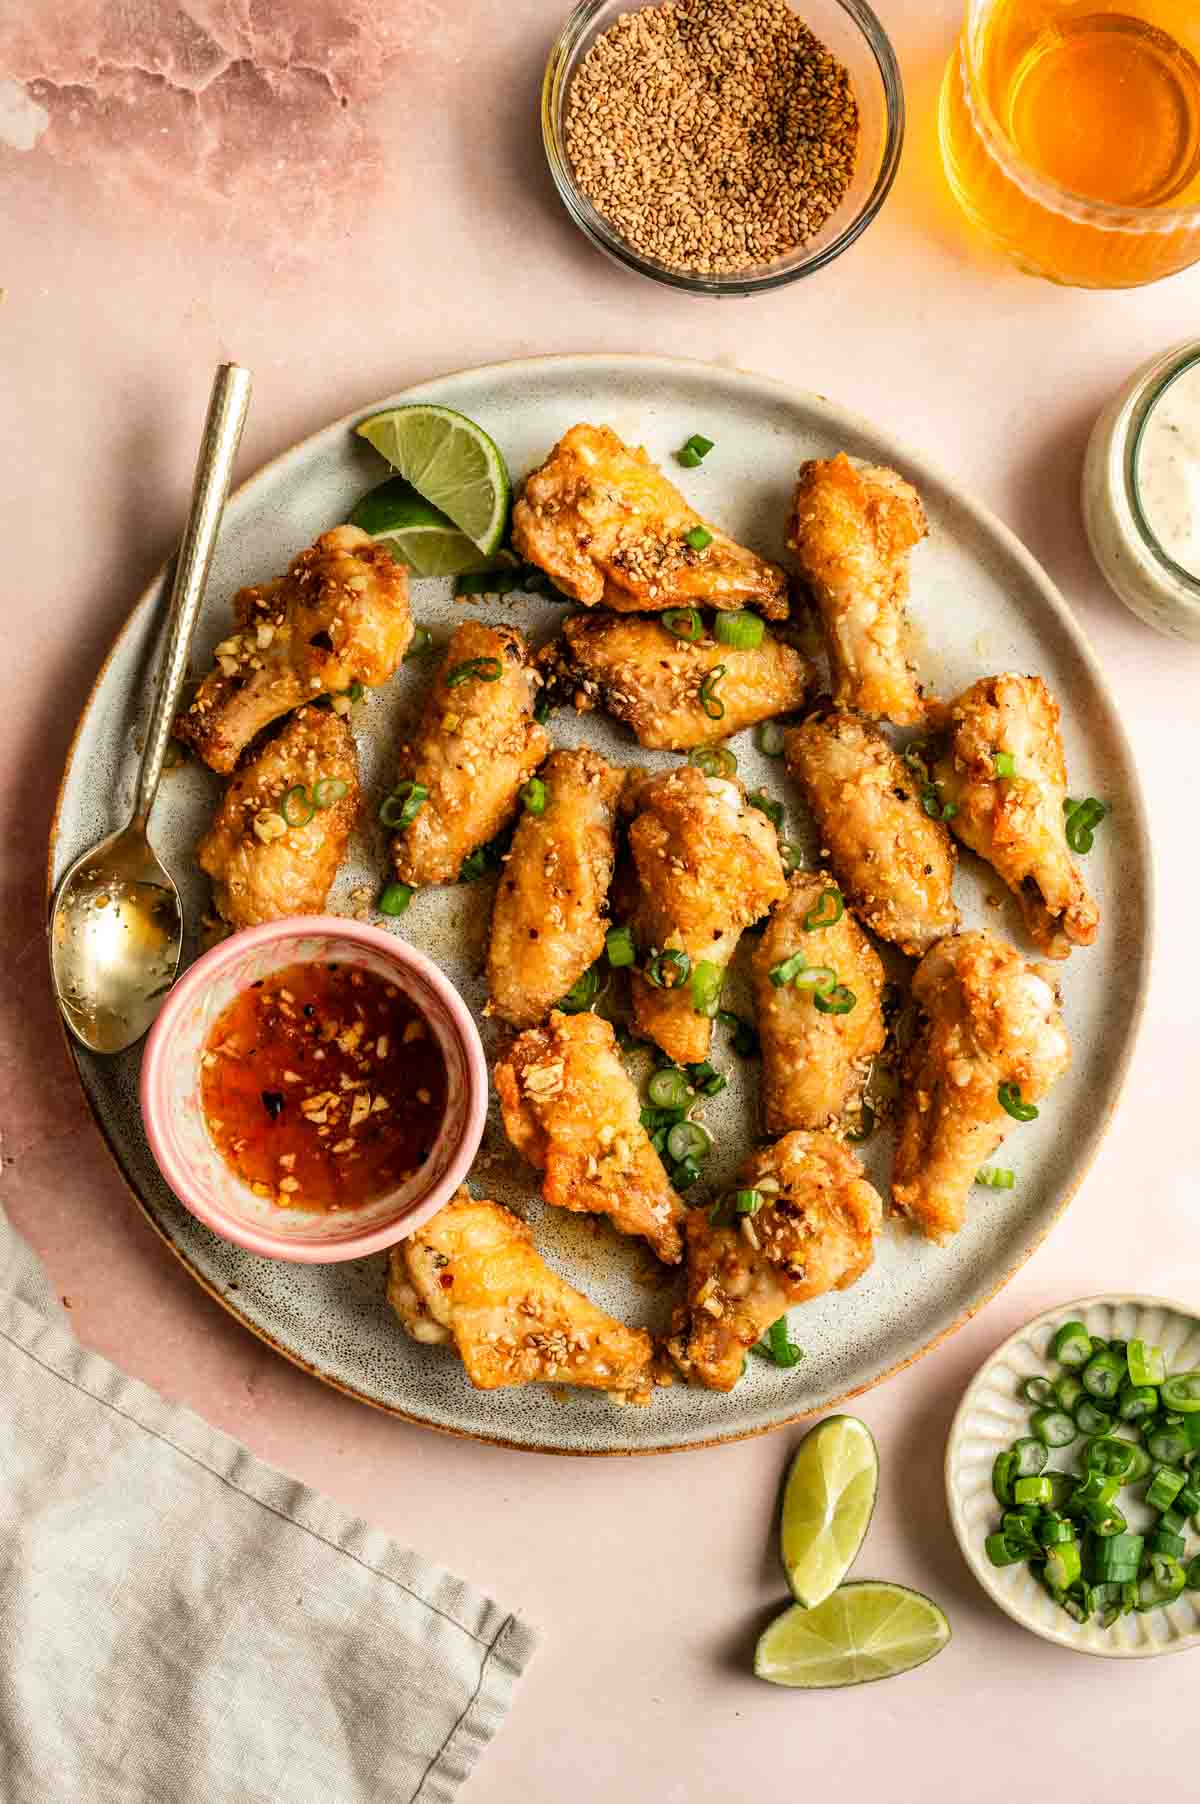 Platter of chicken wings with ranch and celery